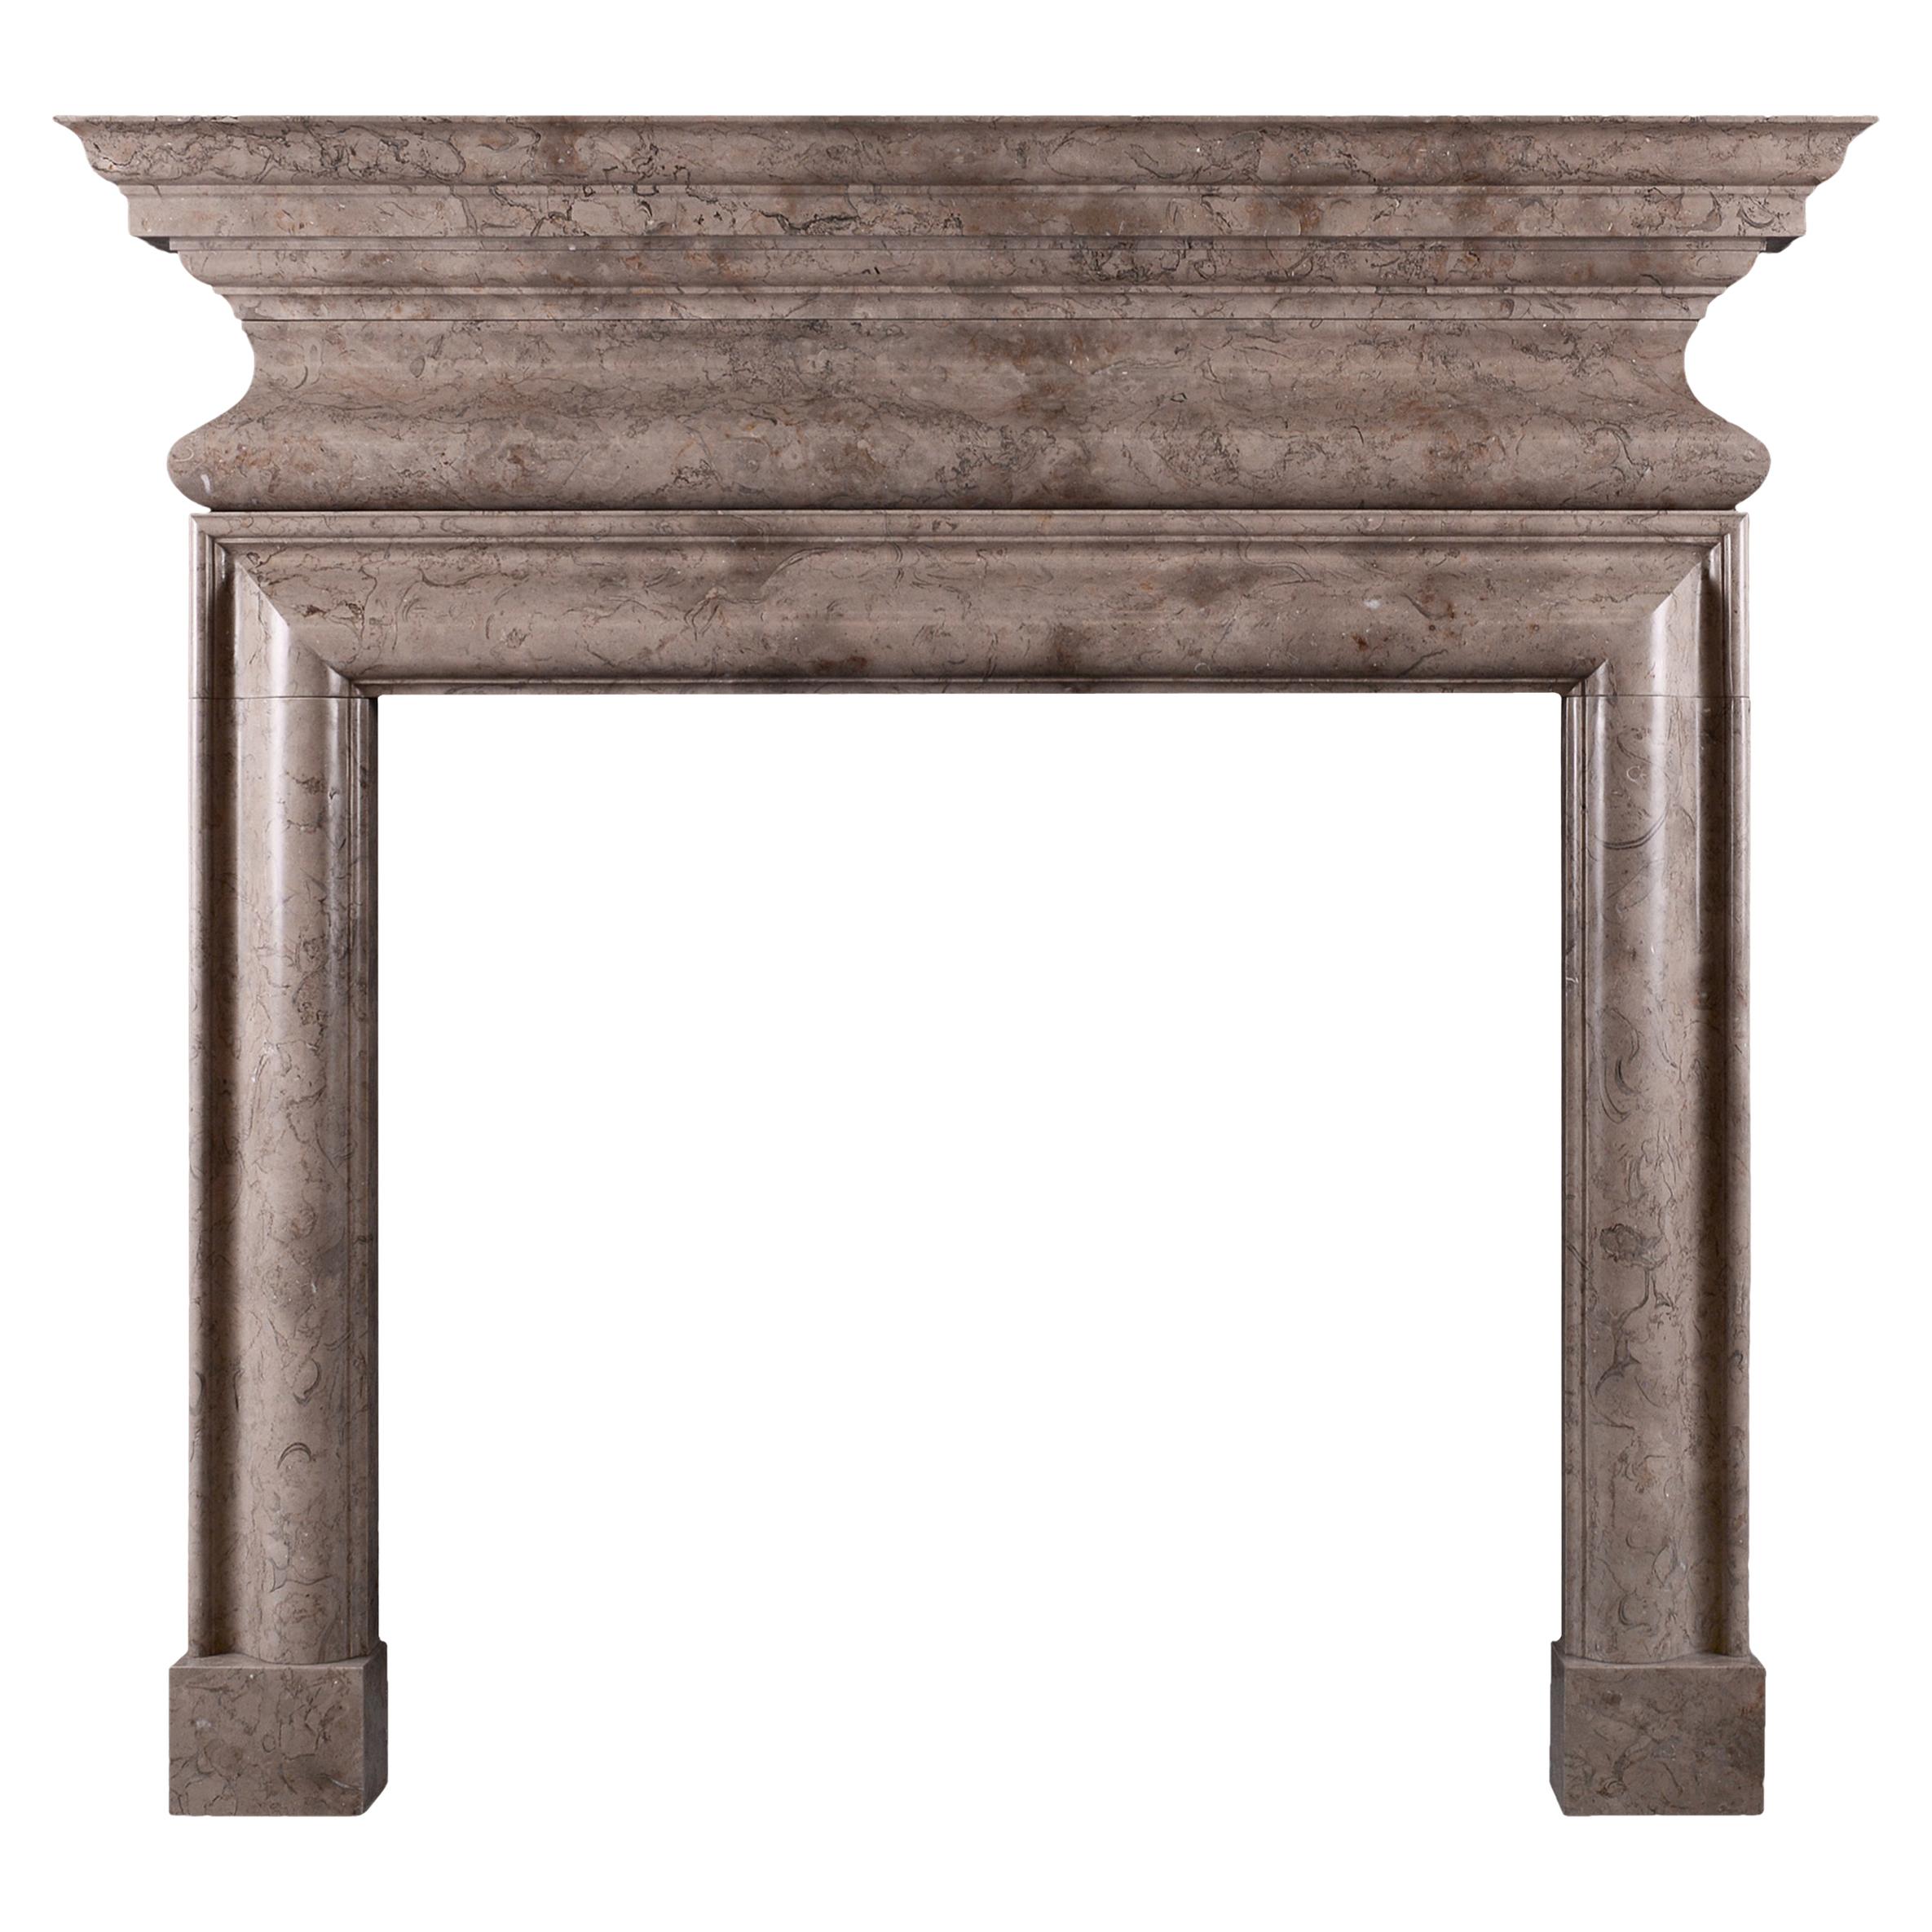 Stylish Architectural Fireplace, a Copy of an Original by Sir Edwin Lutyens For Sale